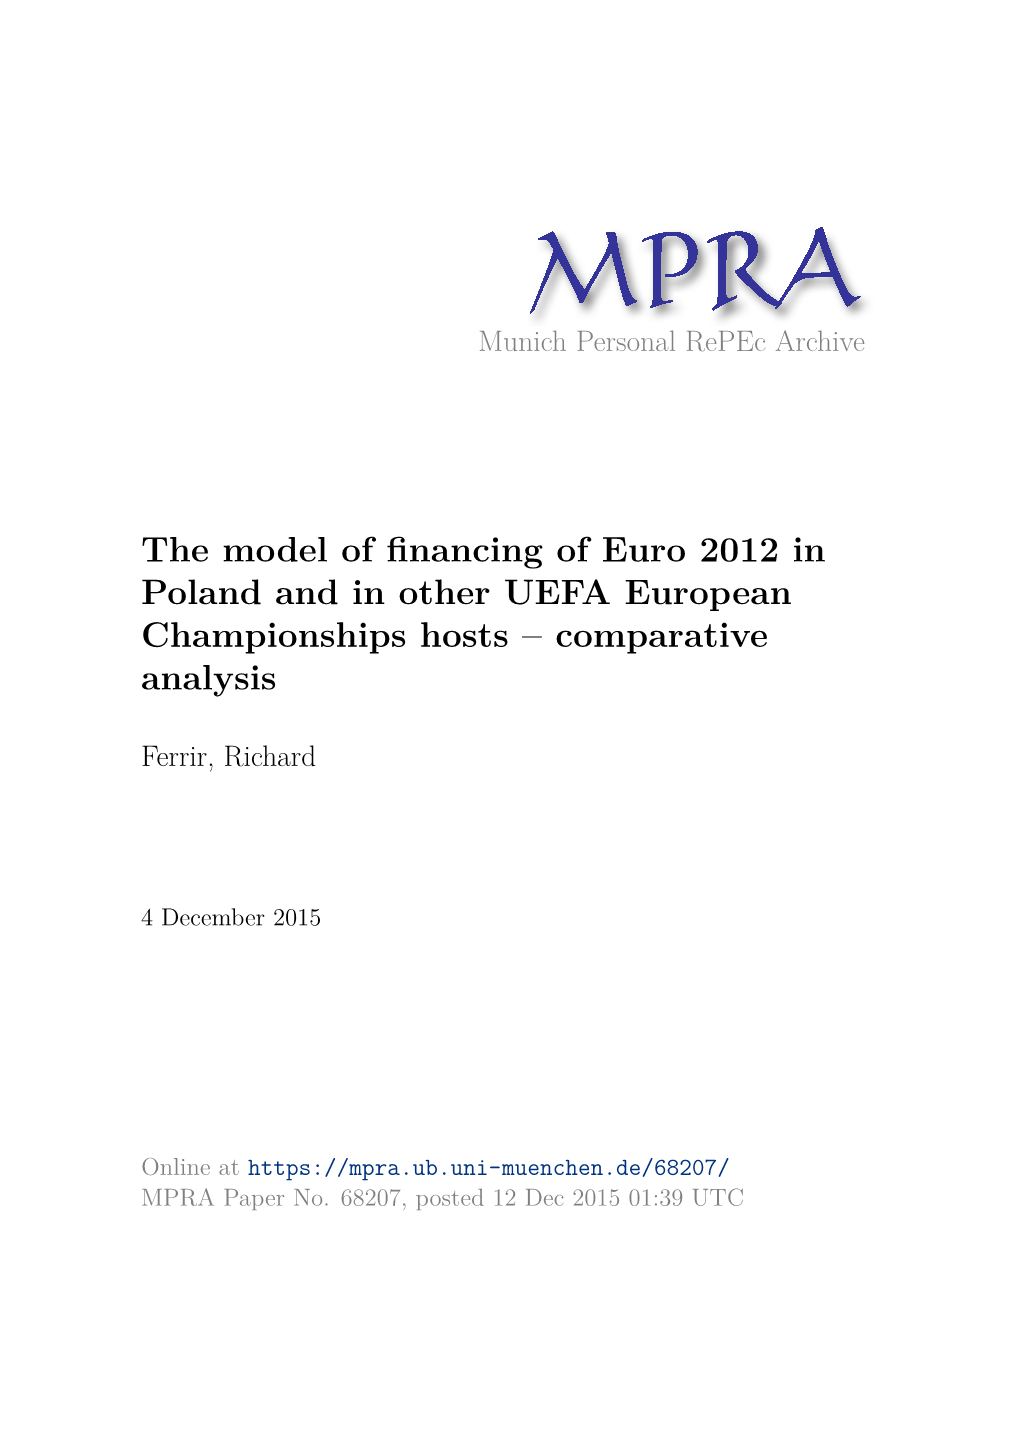 The Model of Financing of Euro 2012 in Poland and in Other UEFA European Championships Hosts – Comparative Analysis